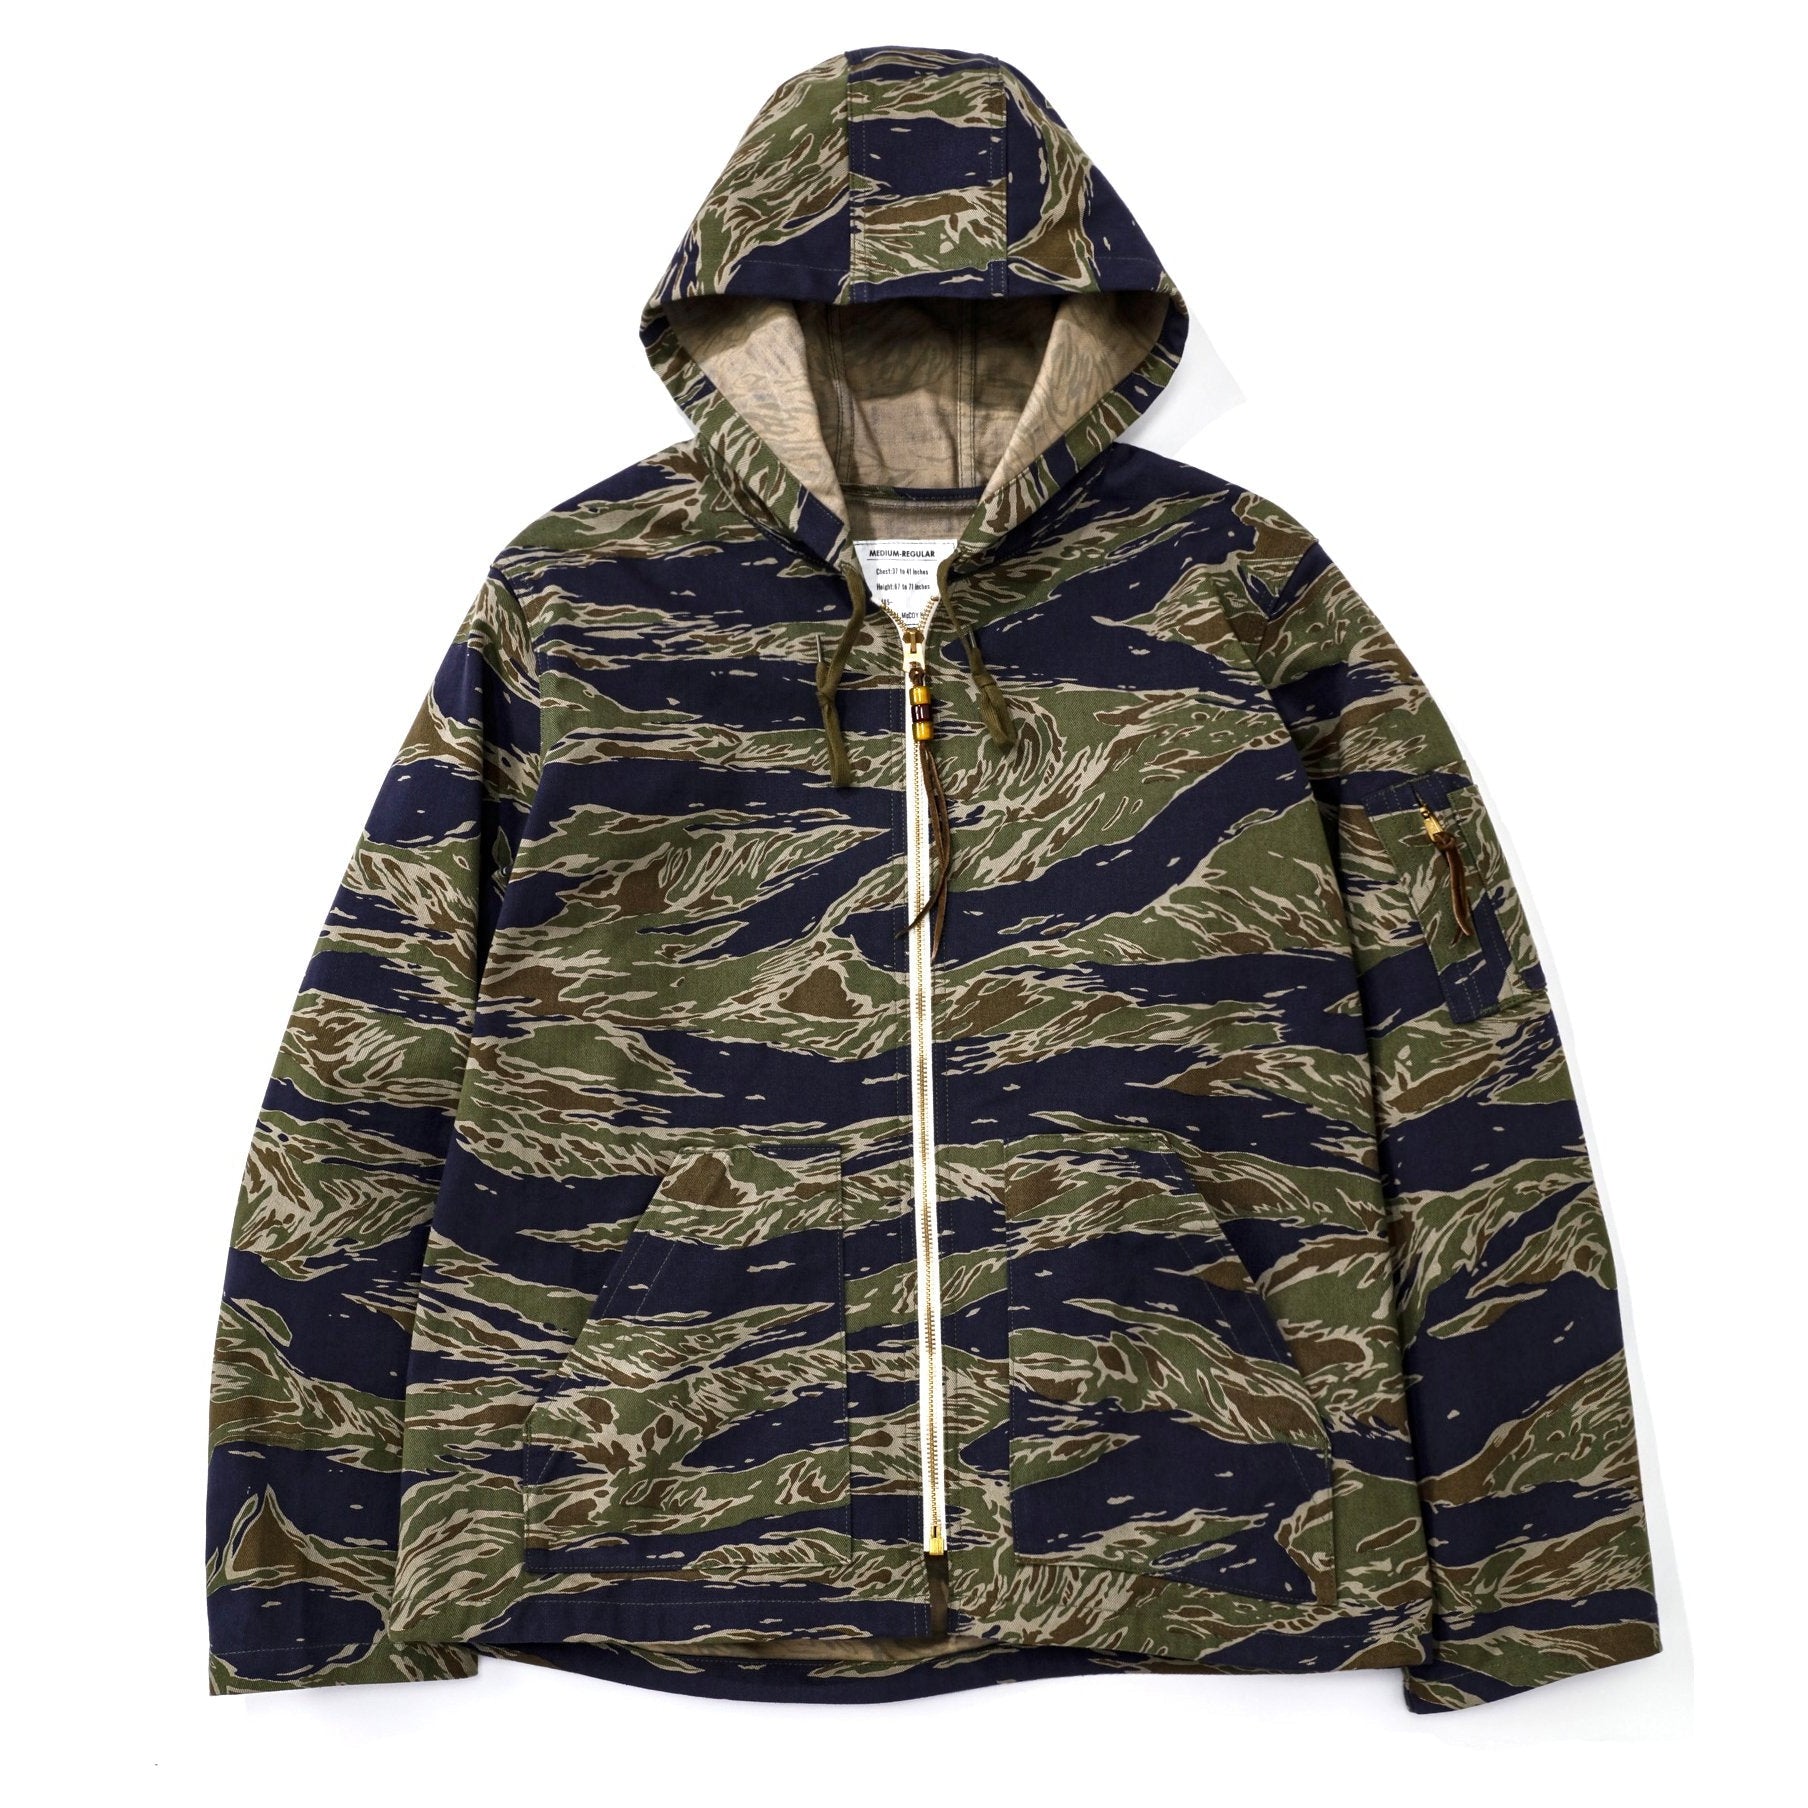 TIGER CAMOUFLAGE PARKA / TADPOLE – The Real McCoy's